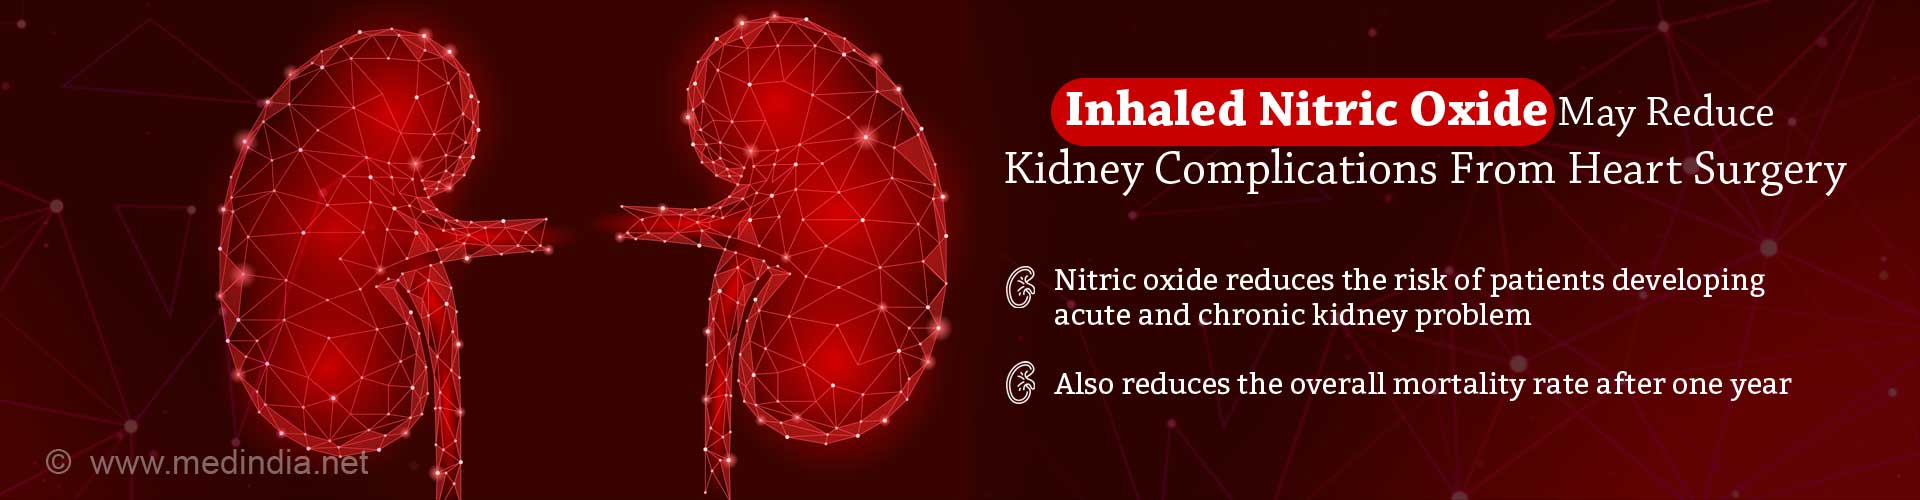 Inhaled nitric oxide may reduce kidney complications from heart surgery. Nitric oxide reduces the risk of patients developing acute and chronic kidney problem. Also reduces the overall mortality rate after one year.